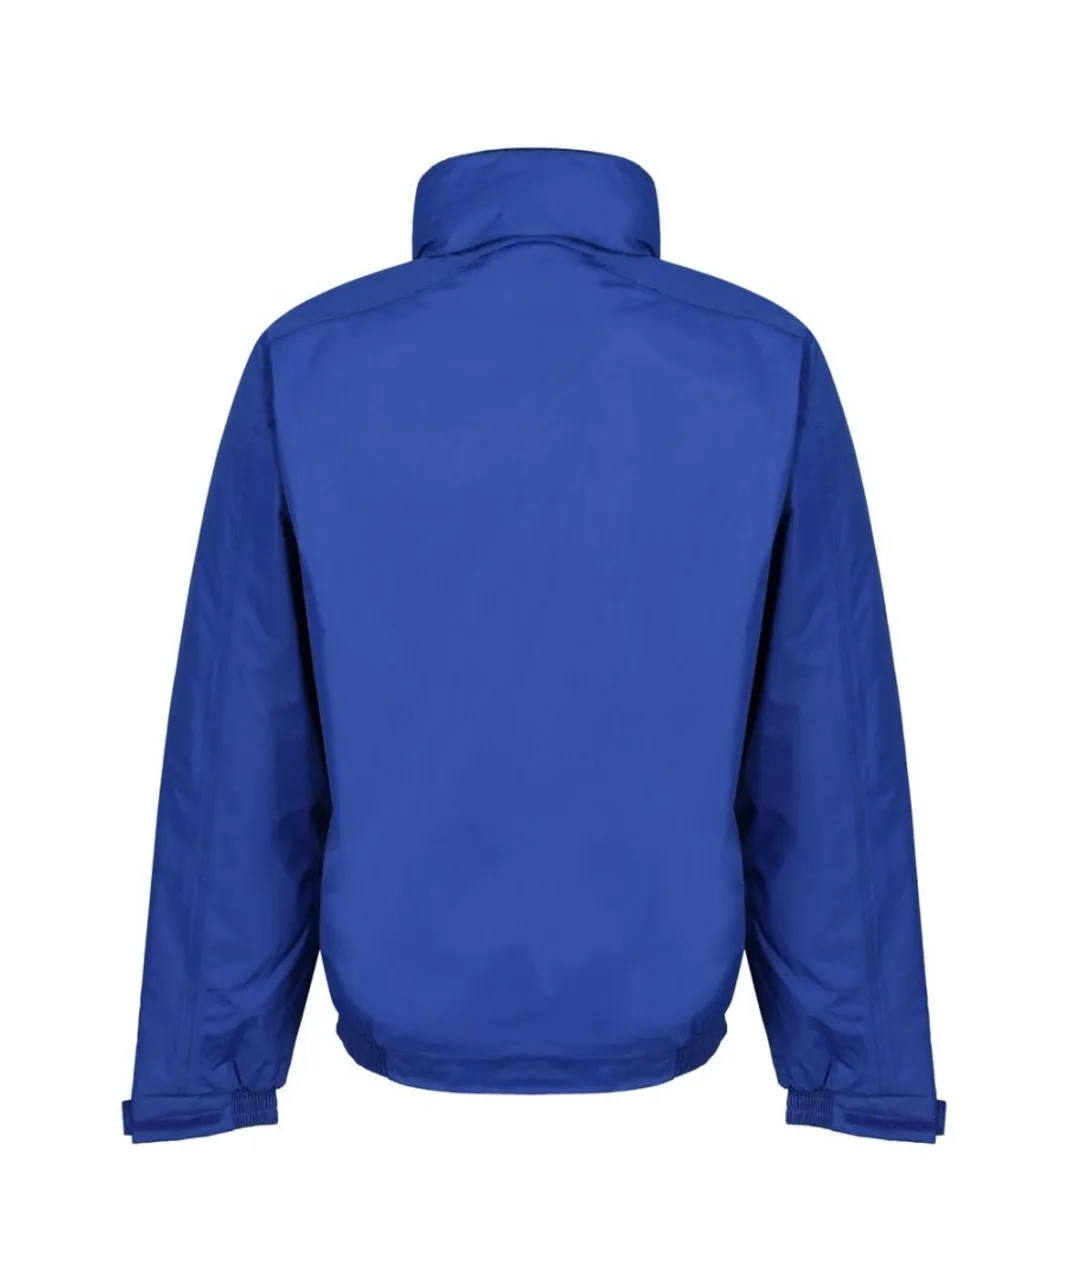 Regatta Mens Dover Waterproof Windproof Jacket (Thermo-Guard Insulation) (Royal Blue)